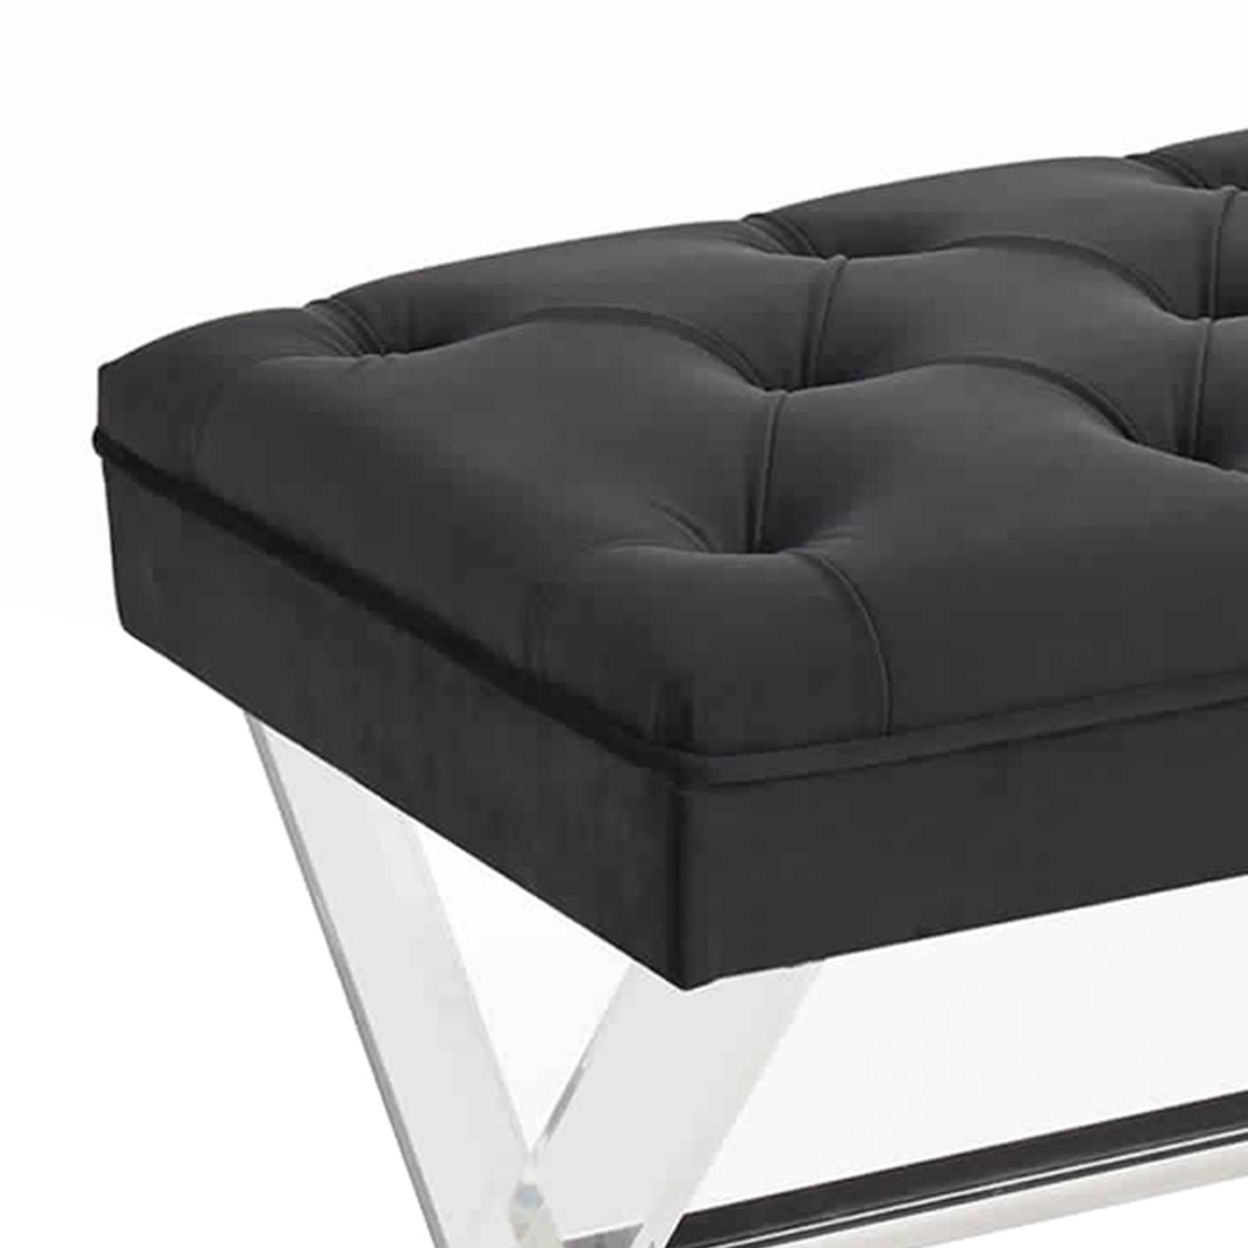 Buy Button Tufted Fabric Ottoman Bench With X Shaped Acrylic Legs With Regard To Black Fabric Ottomans With Fringe Trim (View 4 of 20)